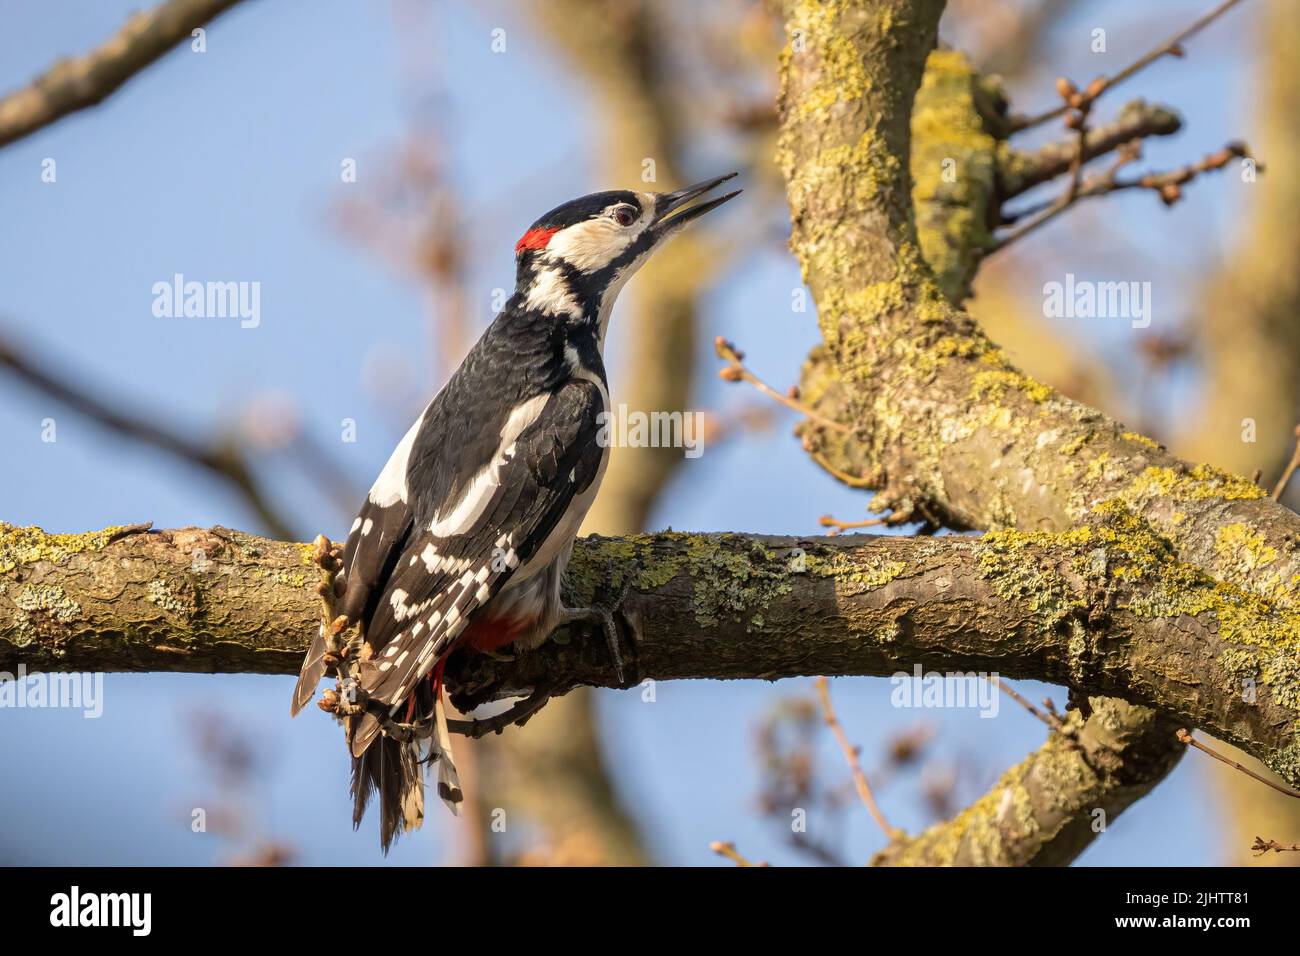 A pair of male great spotted woodpeckers (Dendrocopos major) fighting in the Beddington Farmlands nature reserve in Sutton, London. Stock Photo